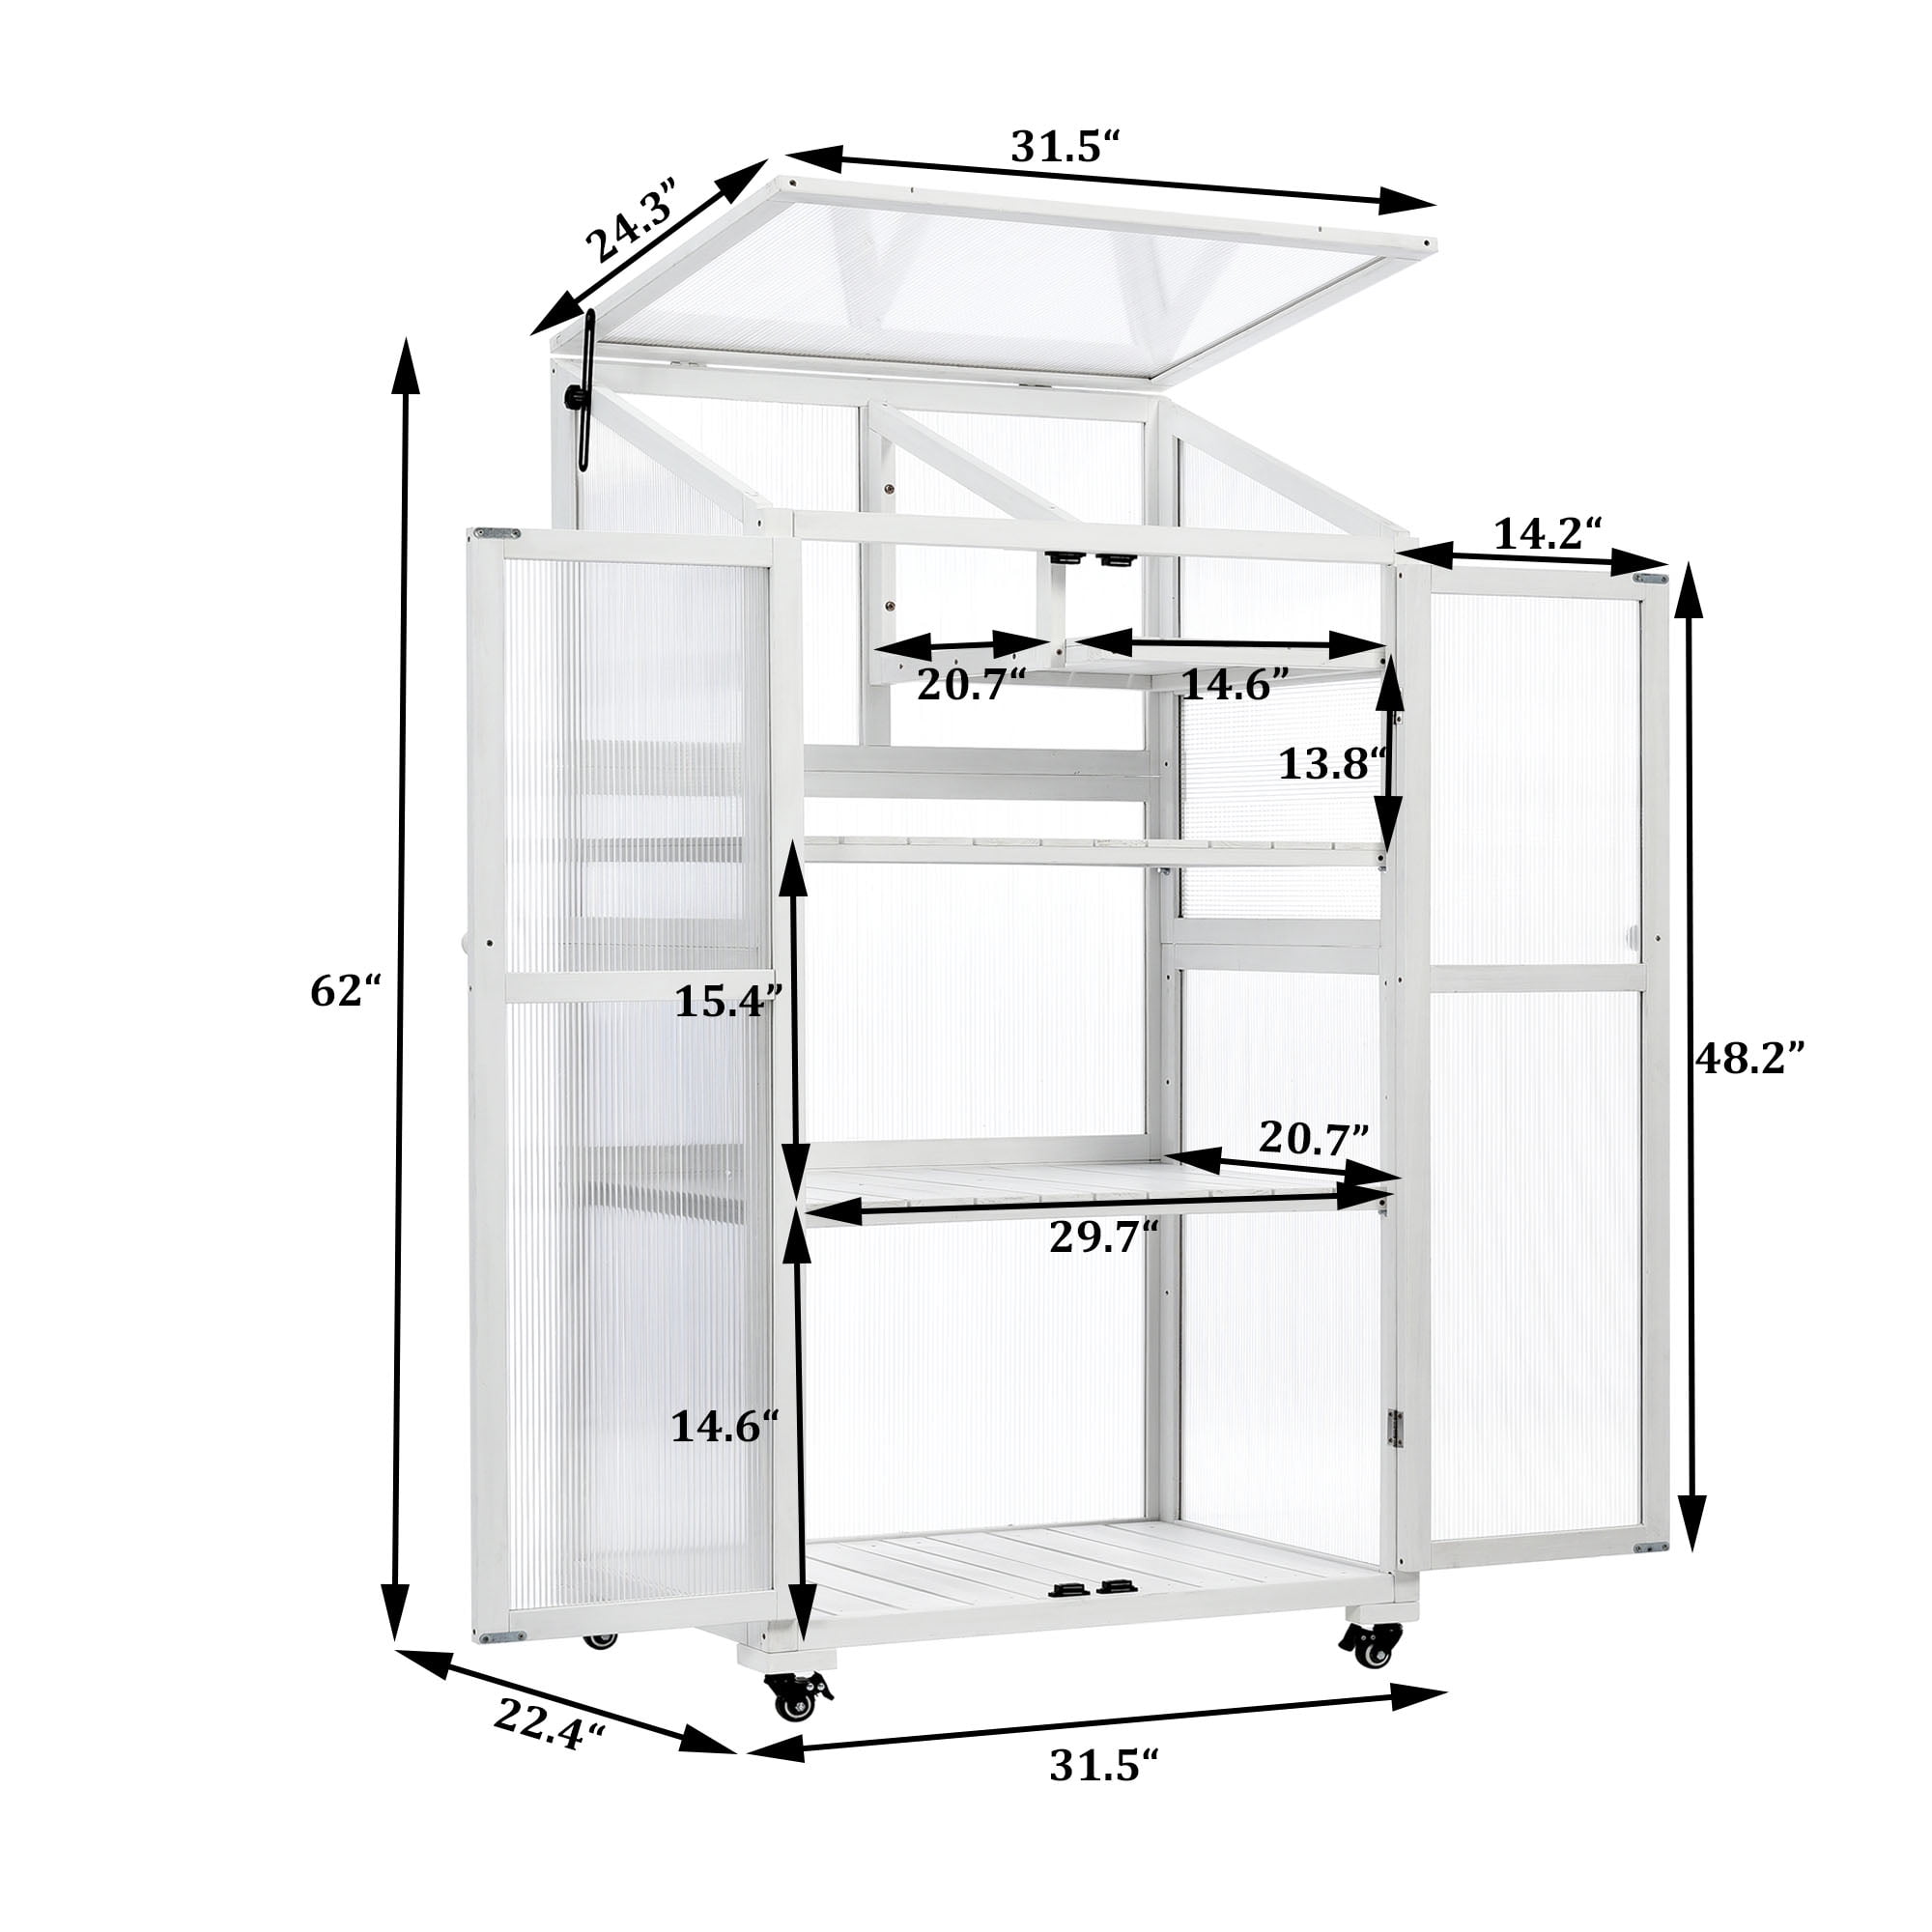 62" Height Wood Large Greenhouse Balcony Portable Cold Frame with Wheels and Adjustable Shelves, Portable Greenhouse with Openable Roof for Outdoor Indoor, Patio and Garden, 31.5"Lx22.4"Wx62"H